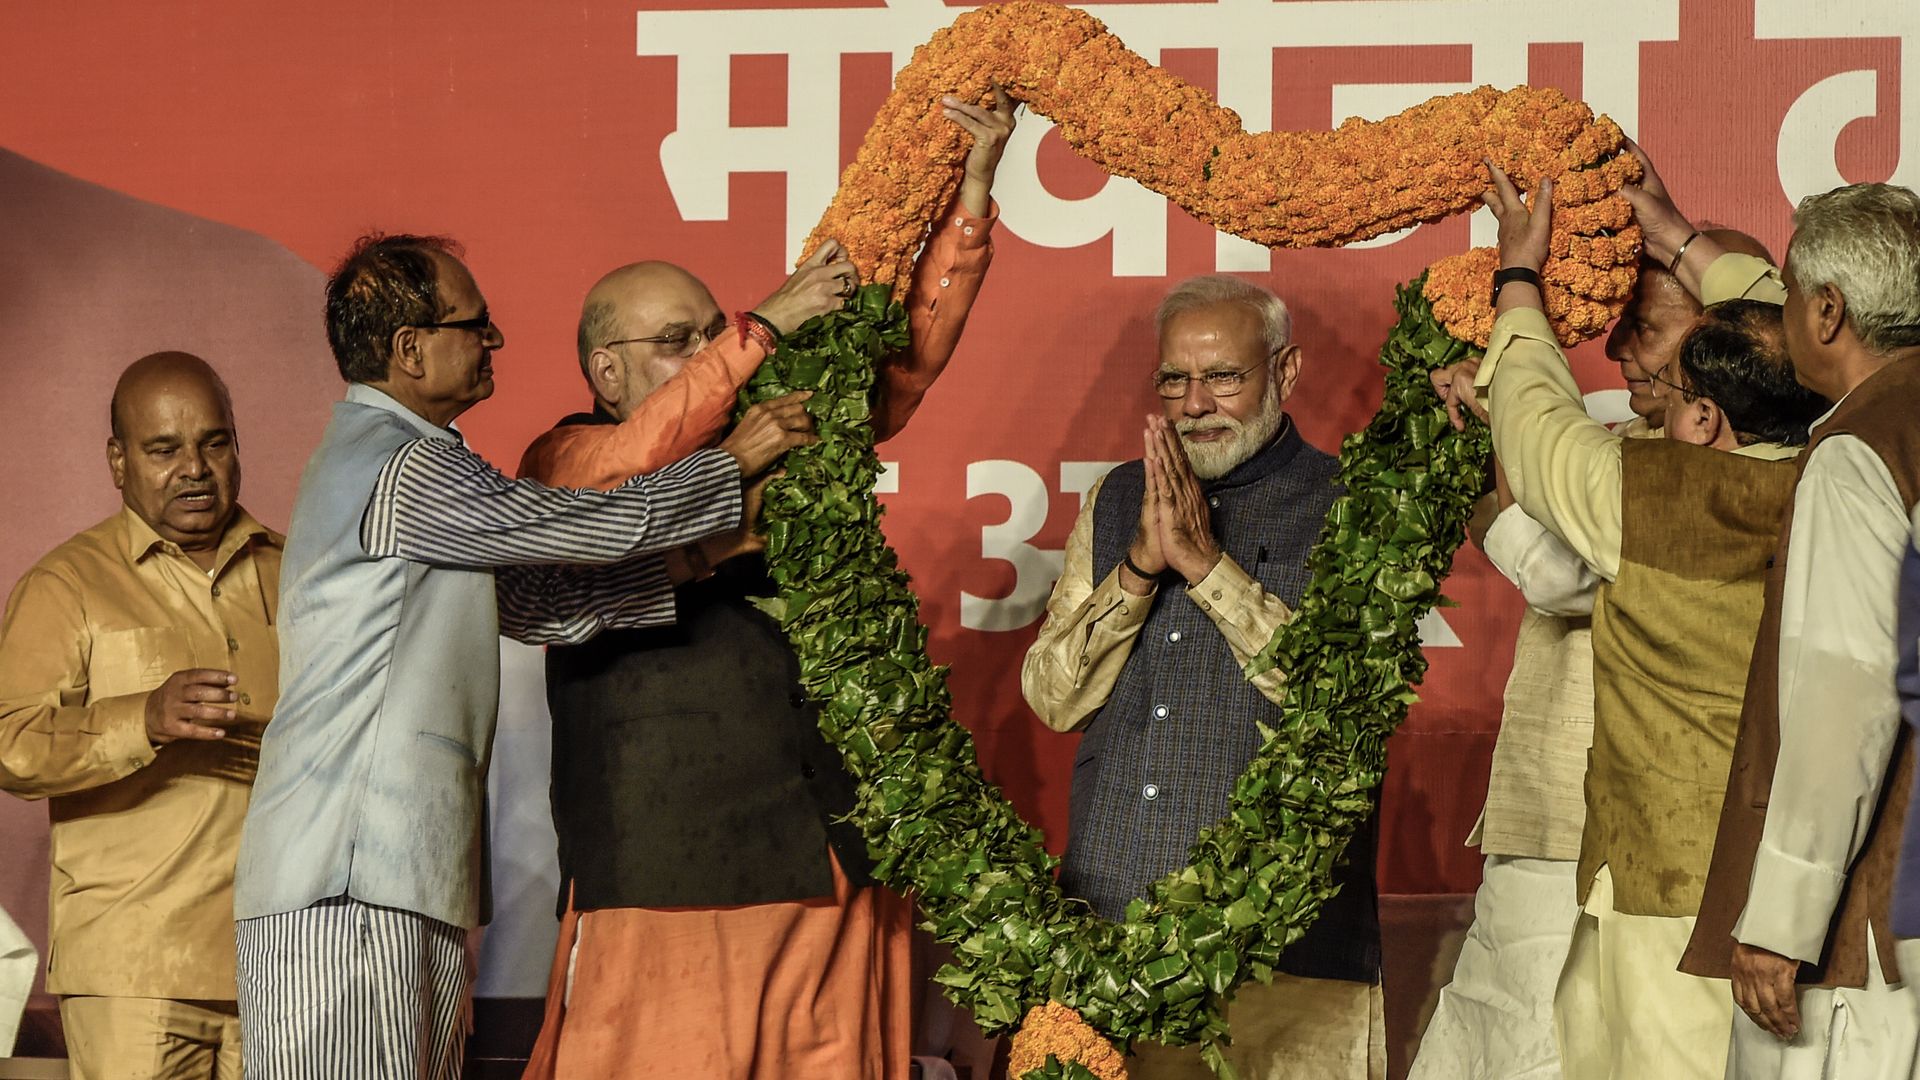 Narendra Modi with a large floral garland